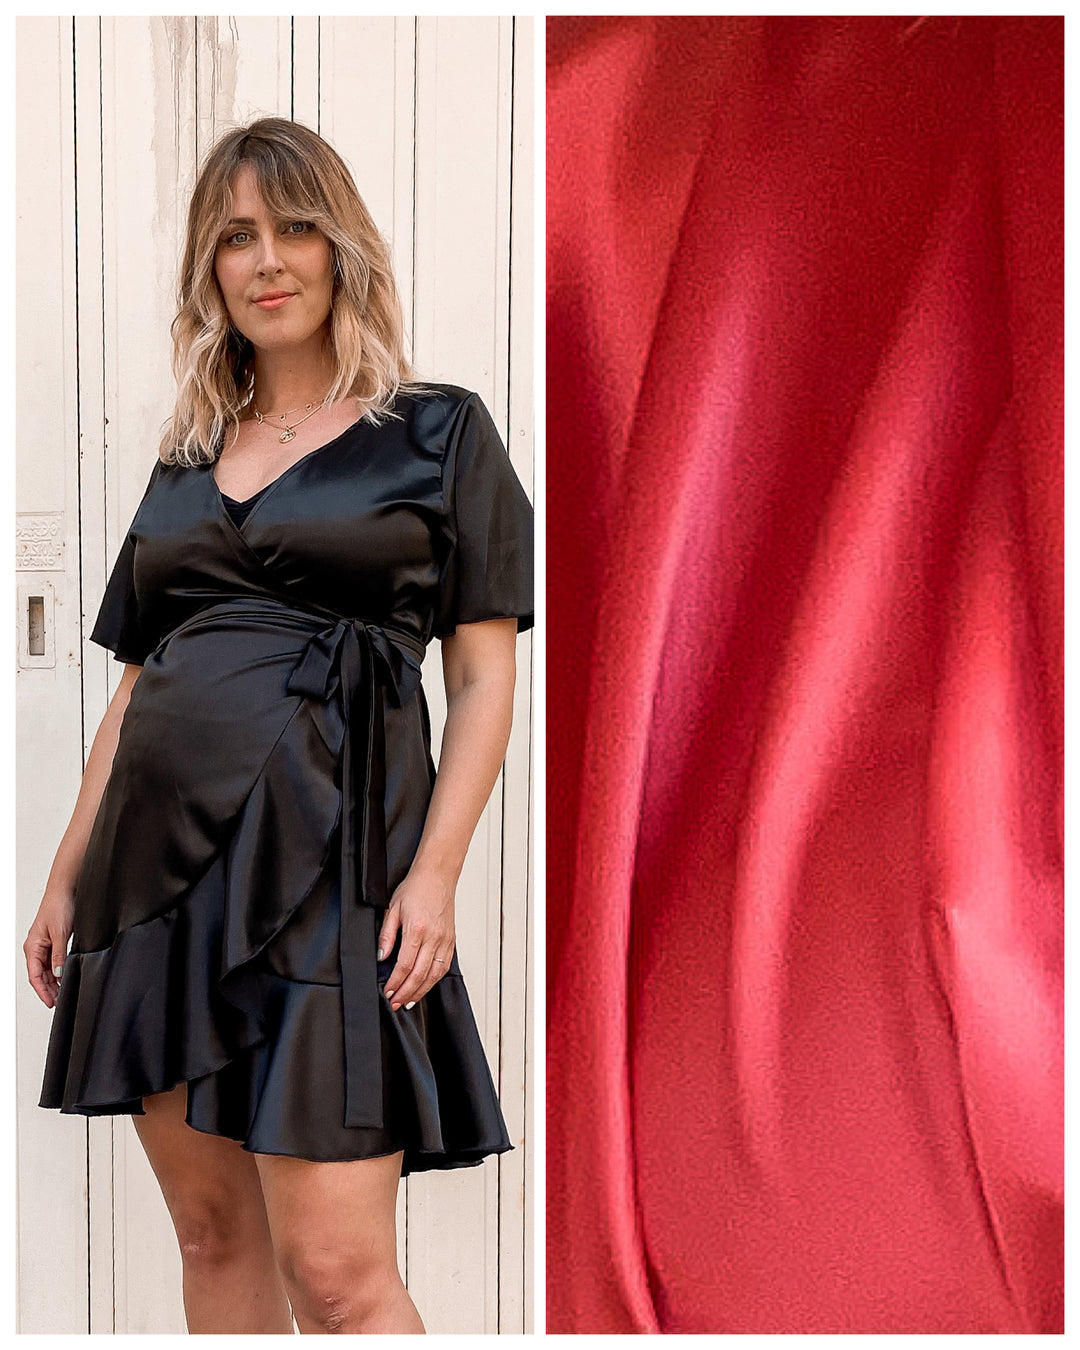 Dress in Satin - CORAL RED